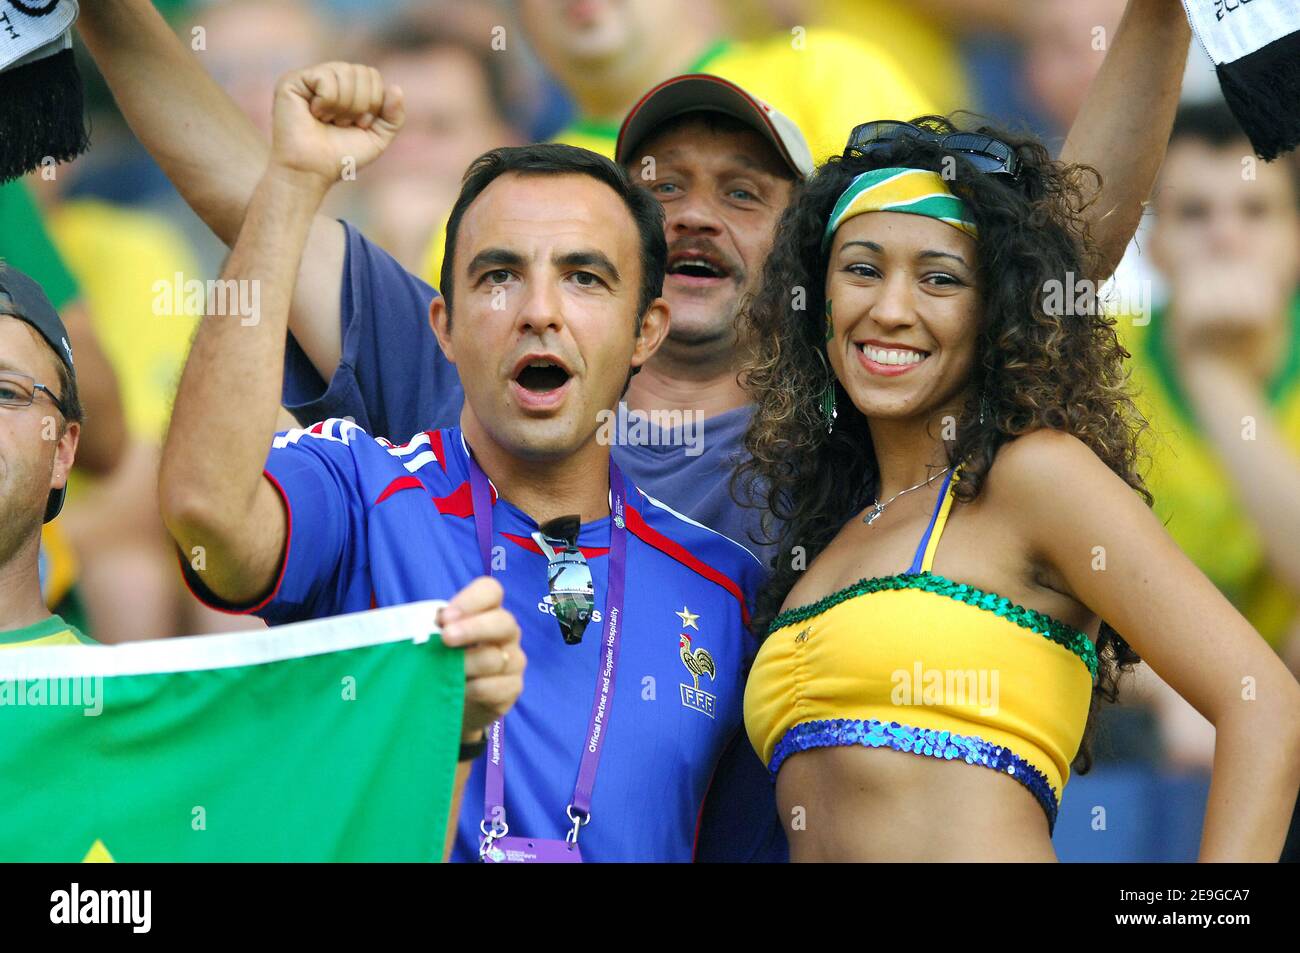 Greek born TV presenter Nikos Aliagas supports French team and Brazilian  female supporter during the World Cup 2006, quater-final, Brazil vs France  at the Commerzbank-Arena stadium in Frankfurt, Germany on July 1,